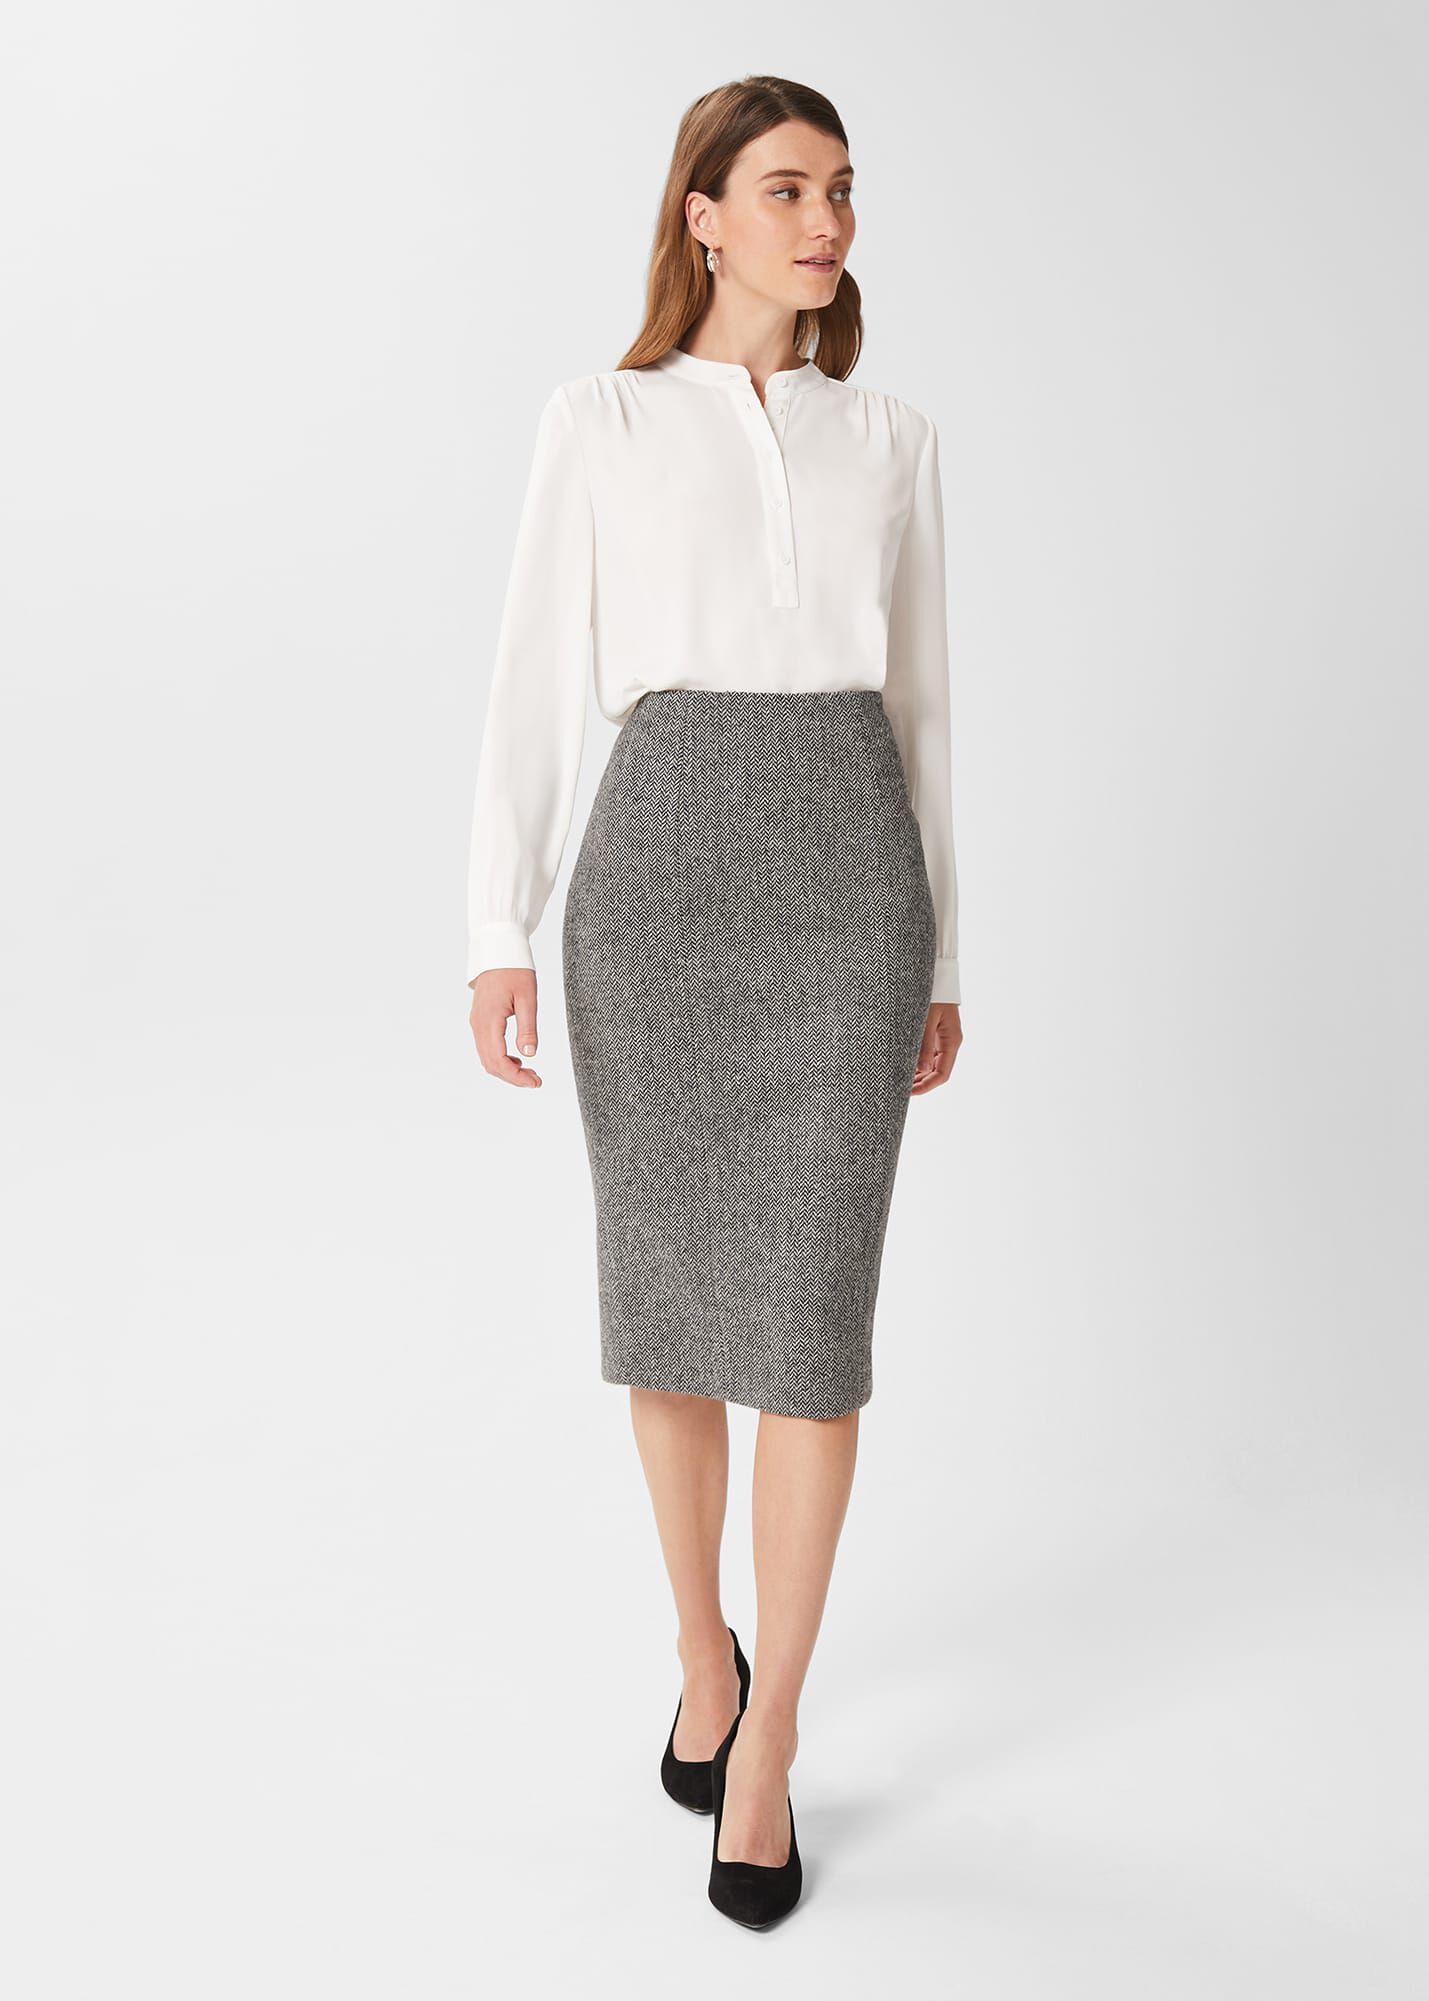 Buy custom branded Wool Blend Mid Length Pencil Skirts with your logo